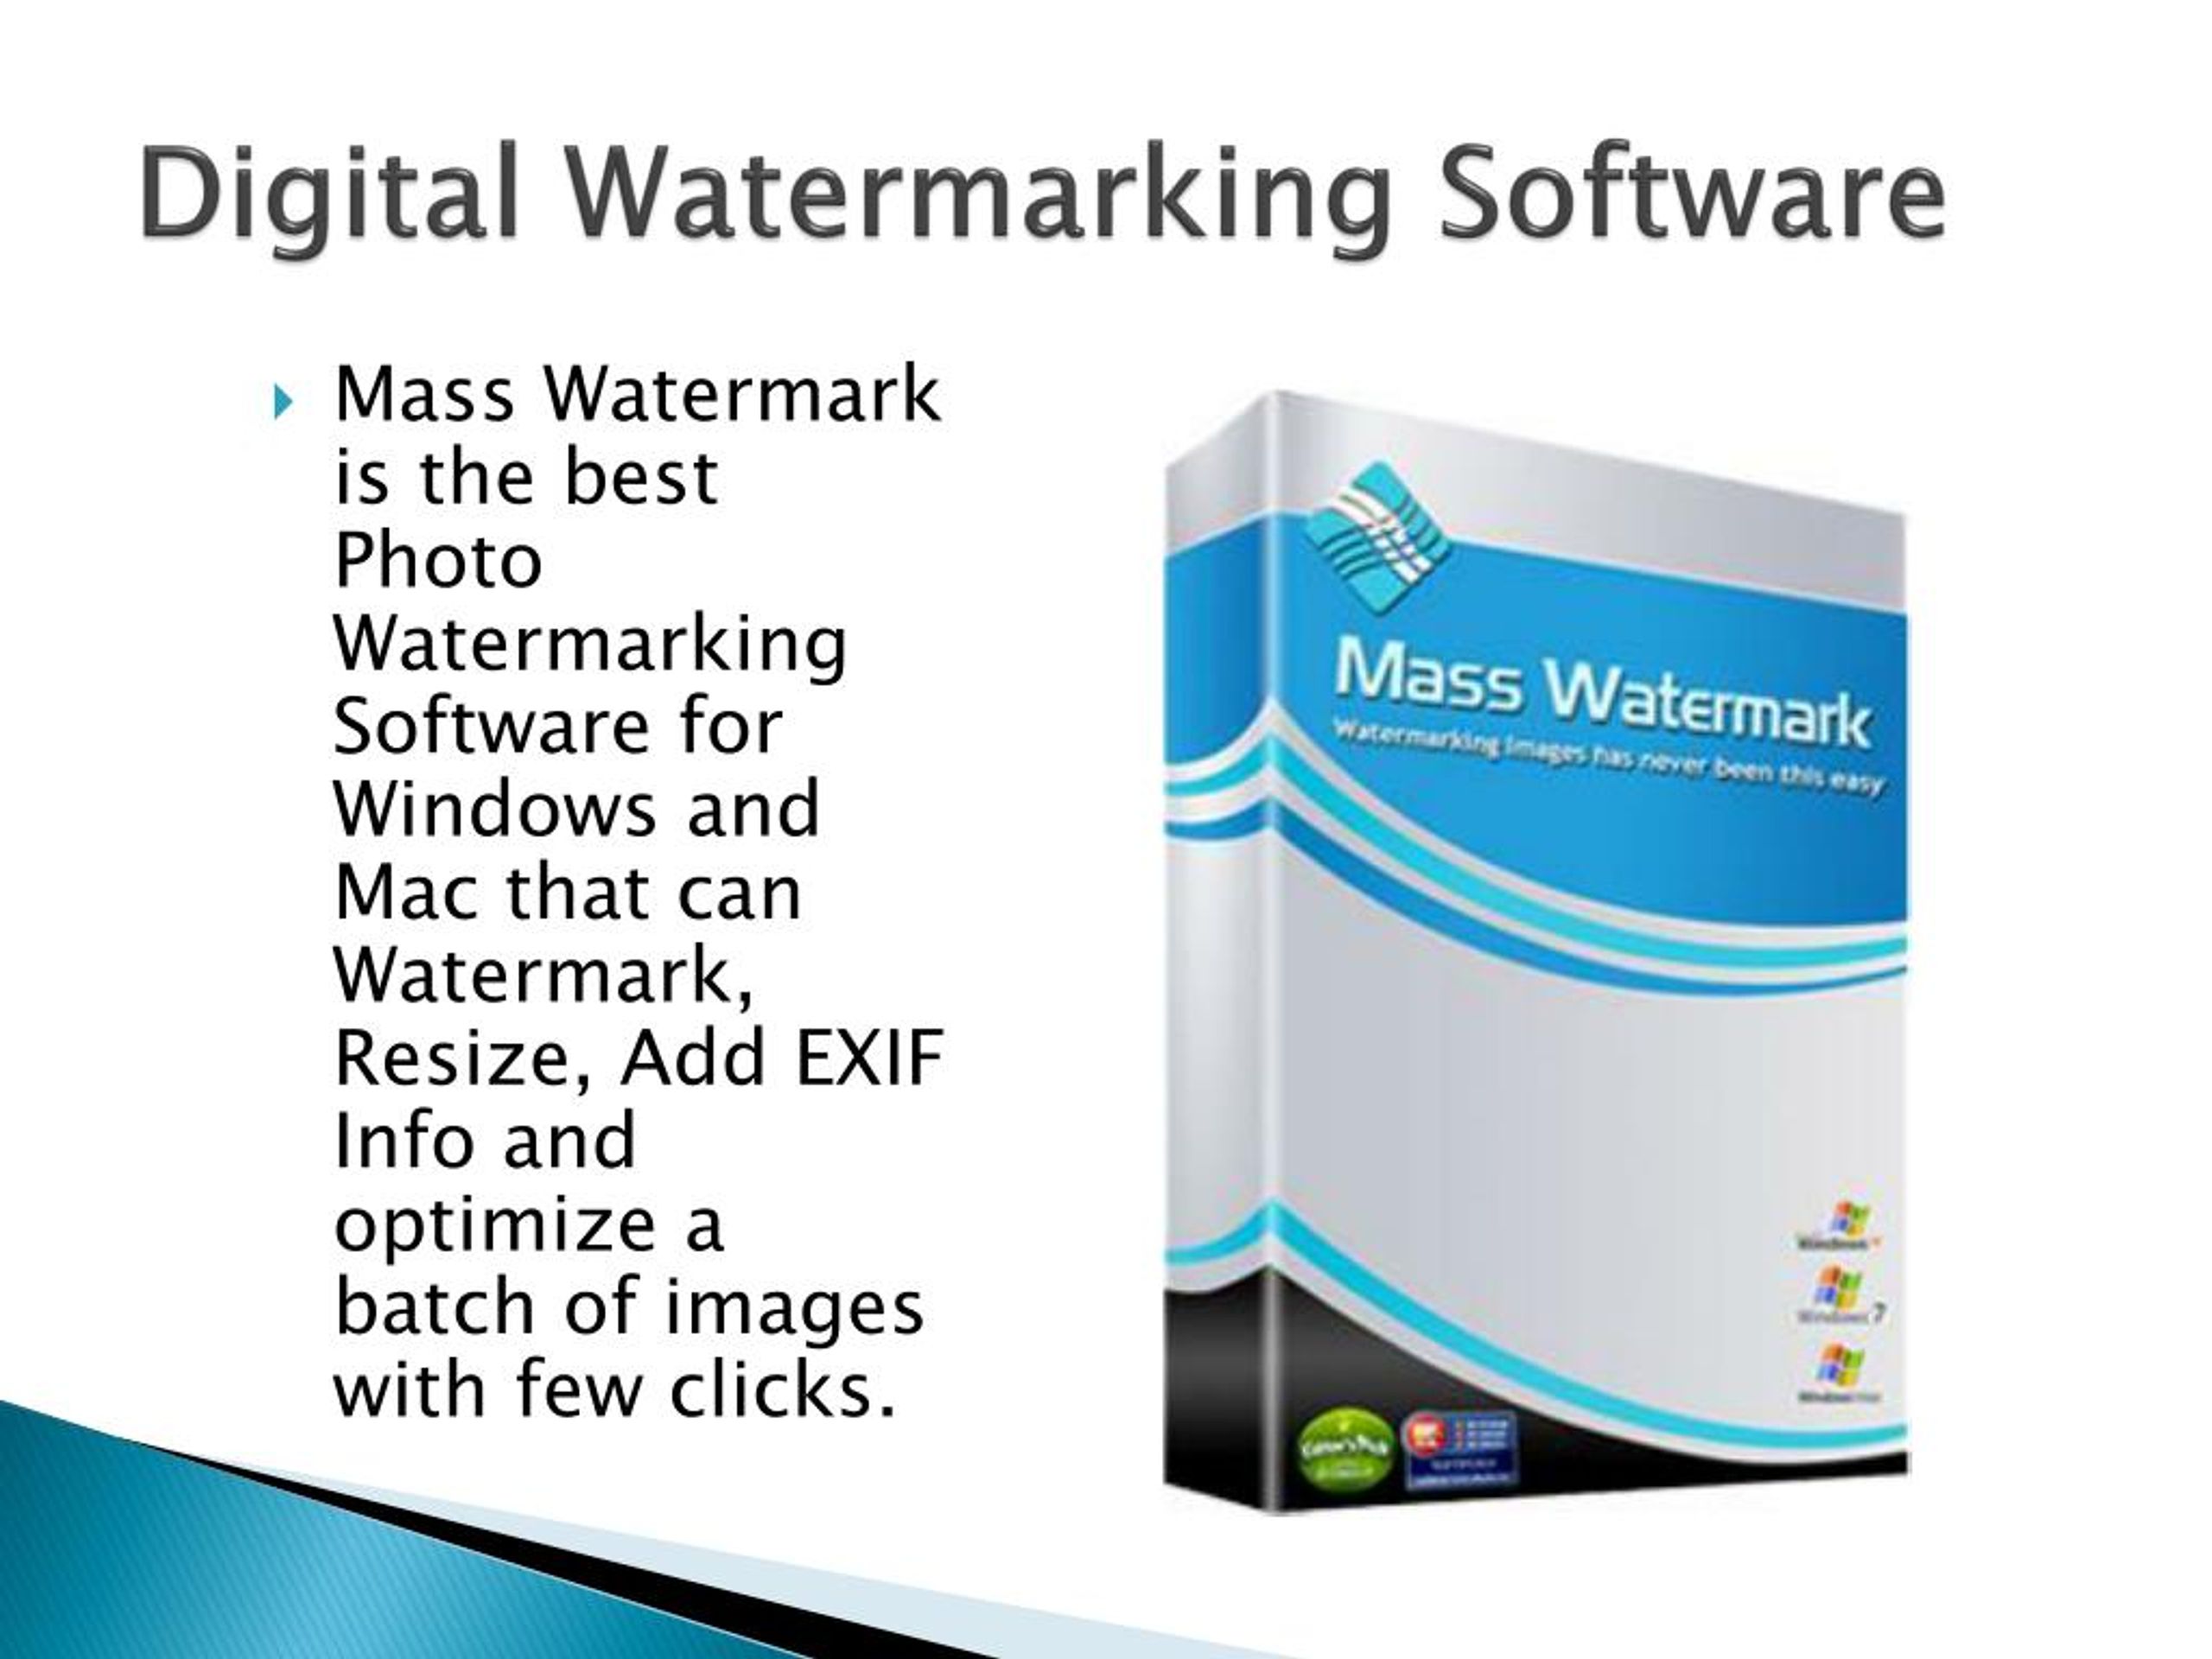 resize image in mass watermark download